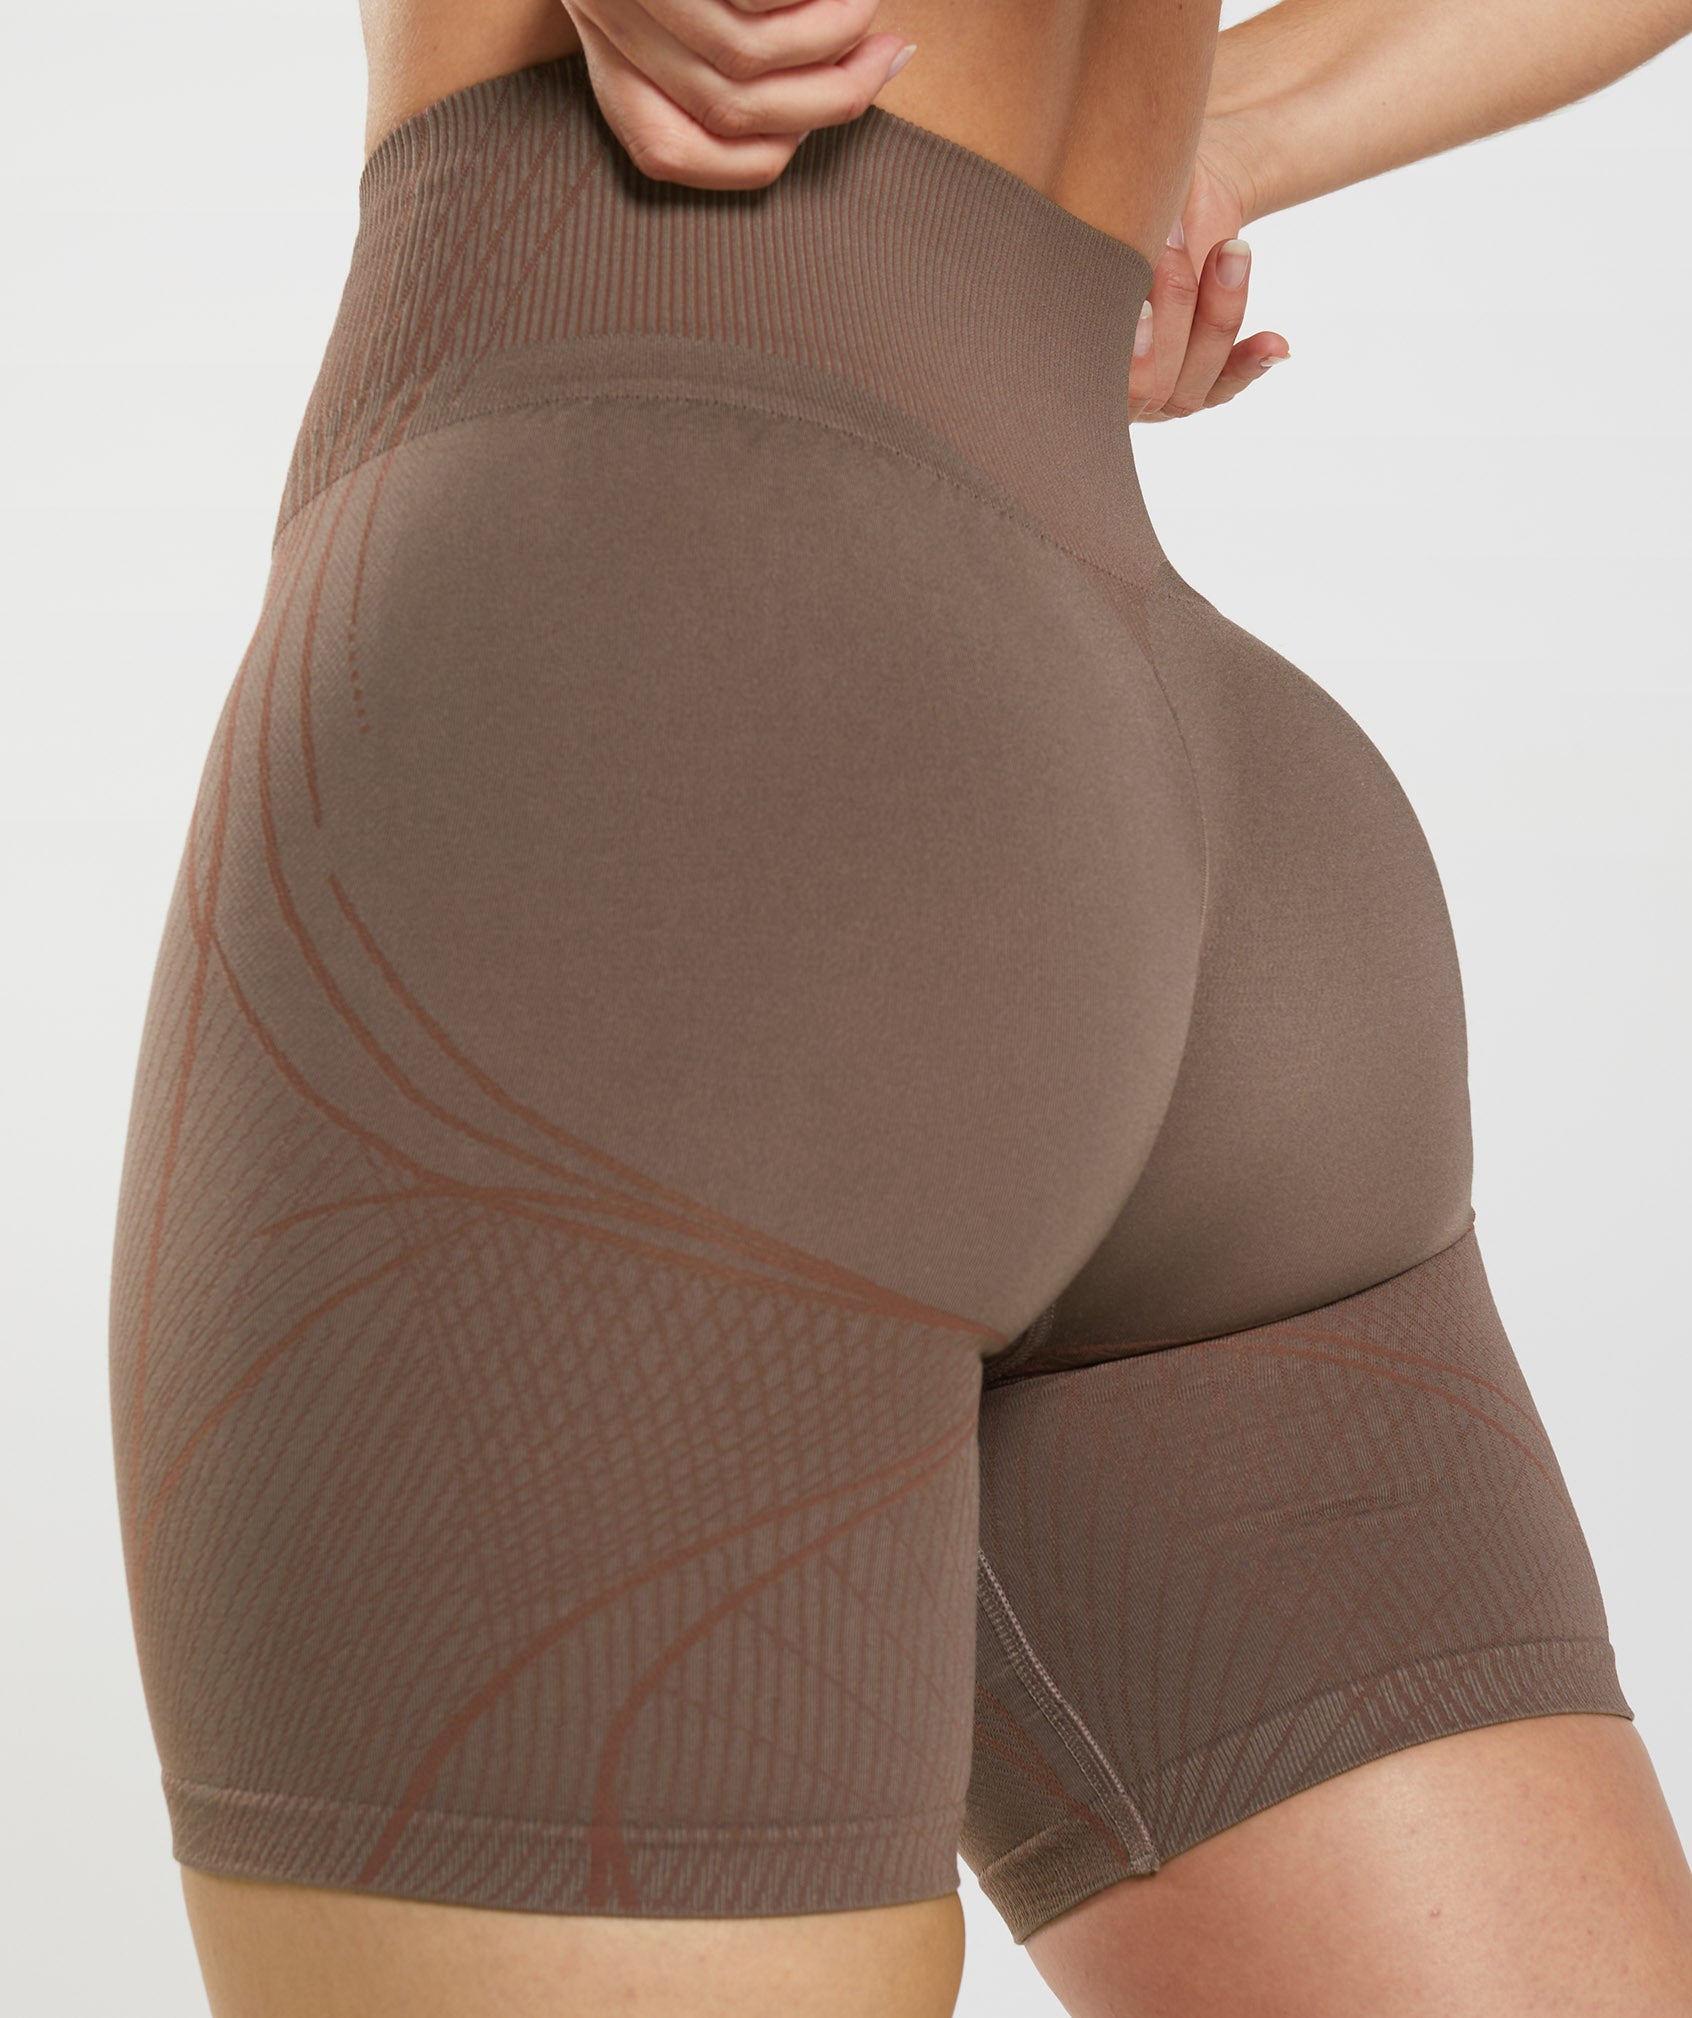 Apex Seamless Shorts in Truffle Brown/Cherry Brown - view 6